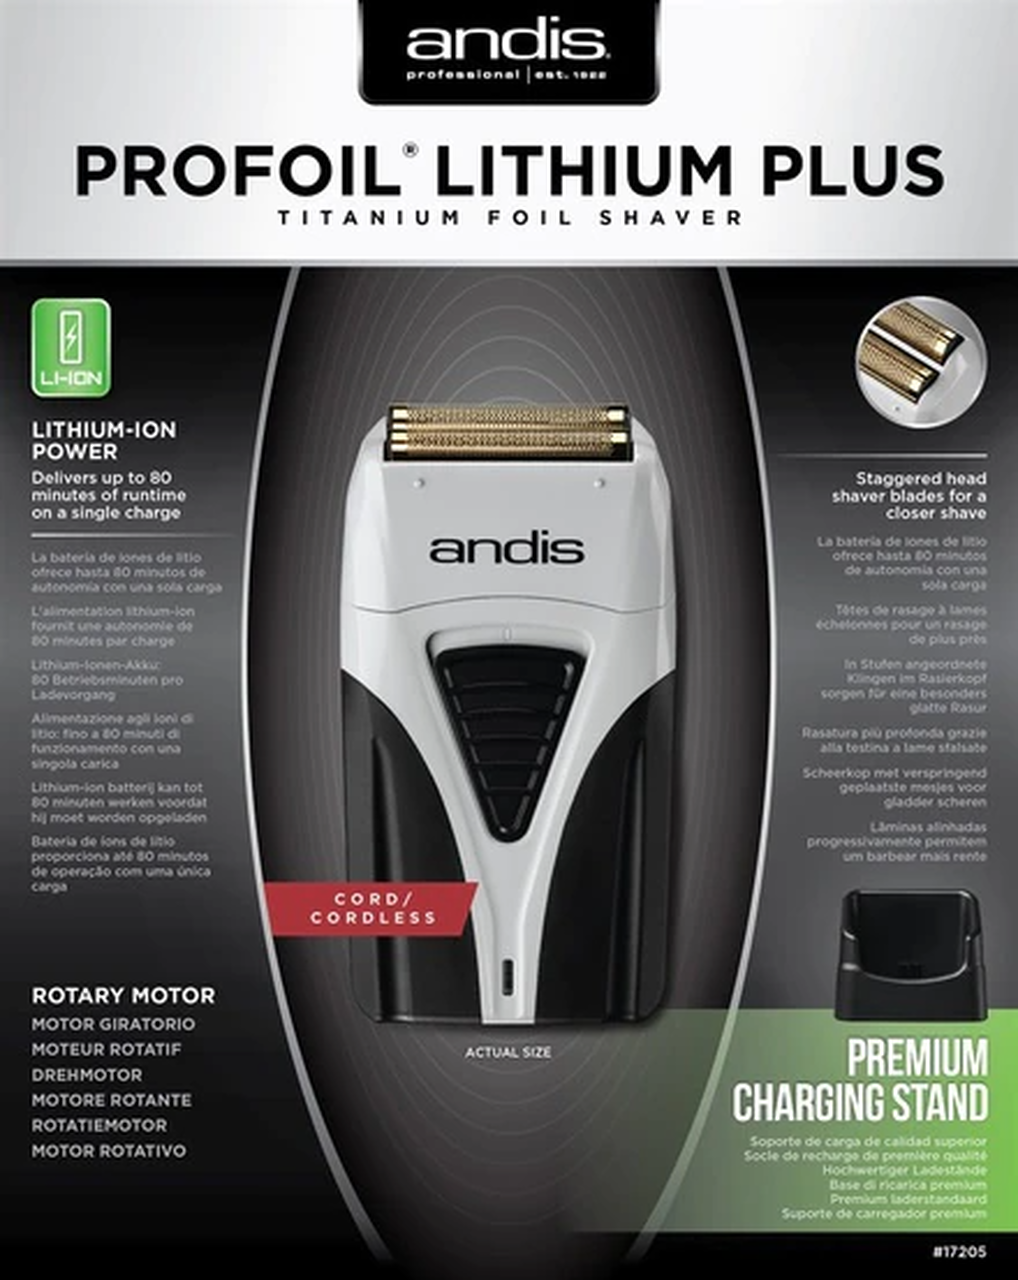 Andis Profoil Lithium PLUS Shaver with Stand - Cordless Shaver TS2